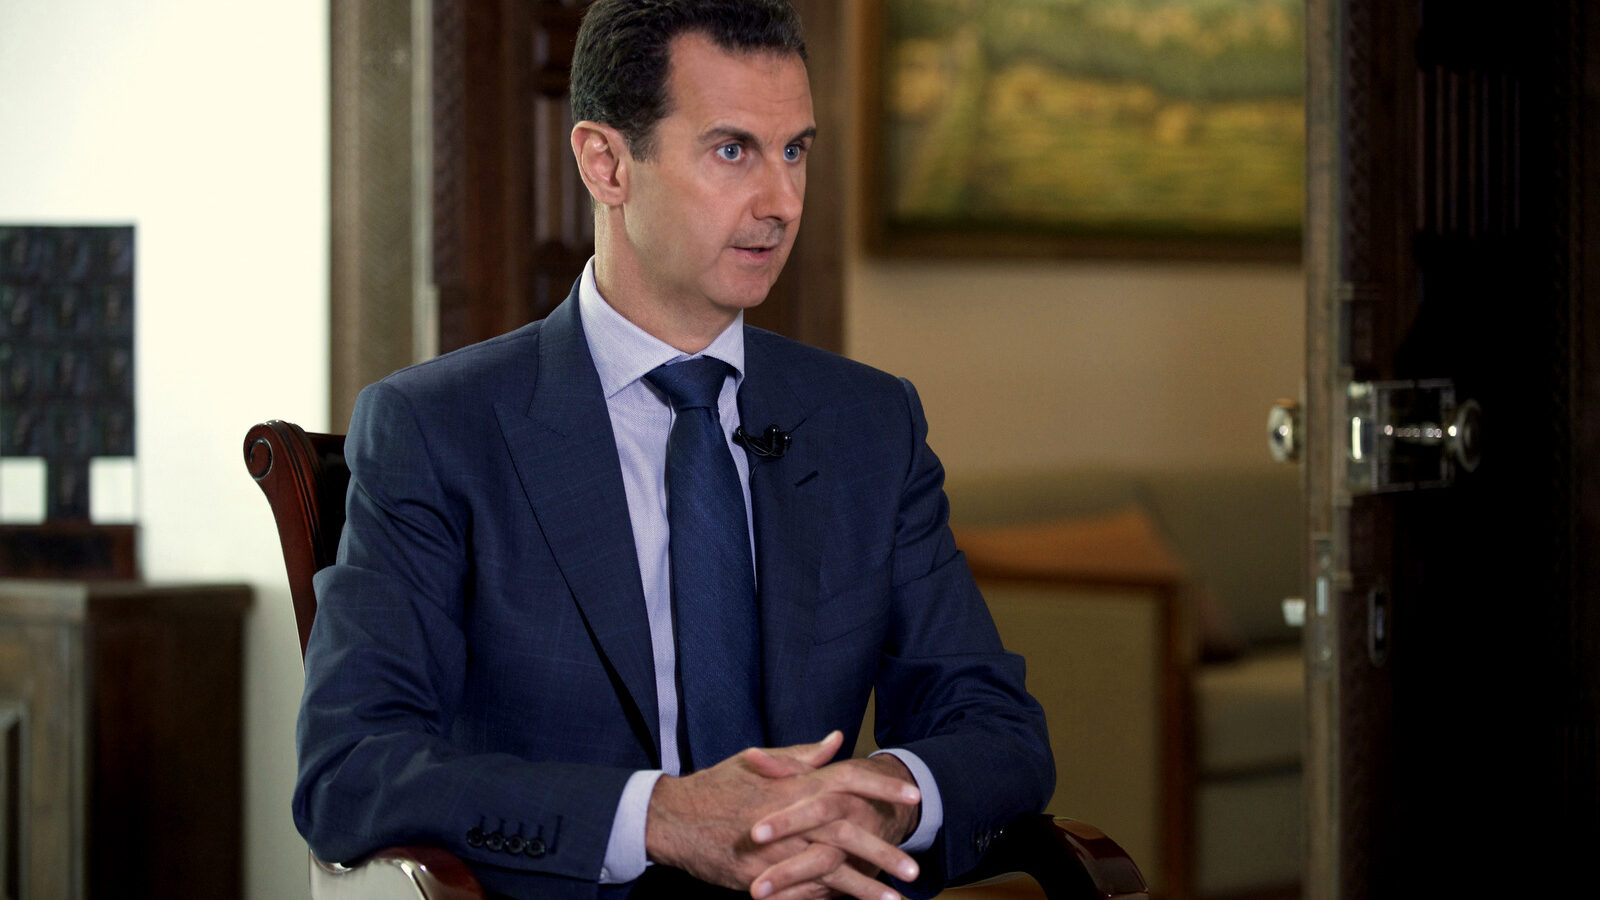 Syrian President Bashar Assad speaks to The Associated Press at the presidential palace in Damascus, Syria. (Syrian Presidency via AP, File)